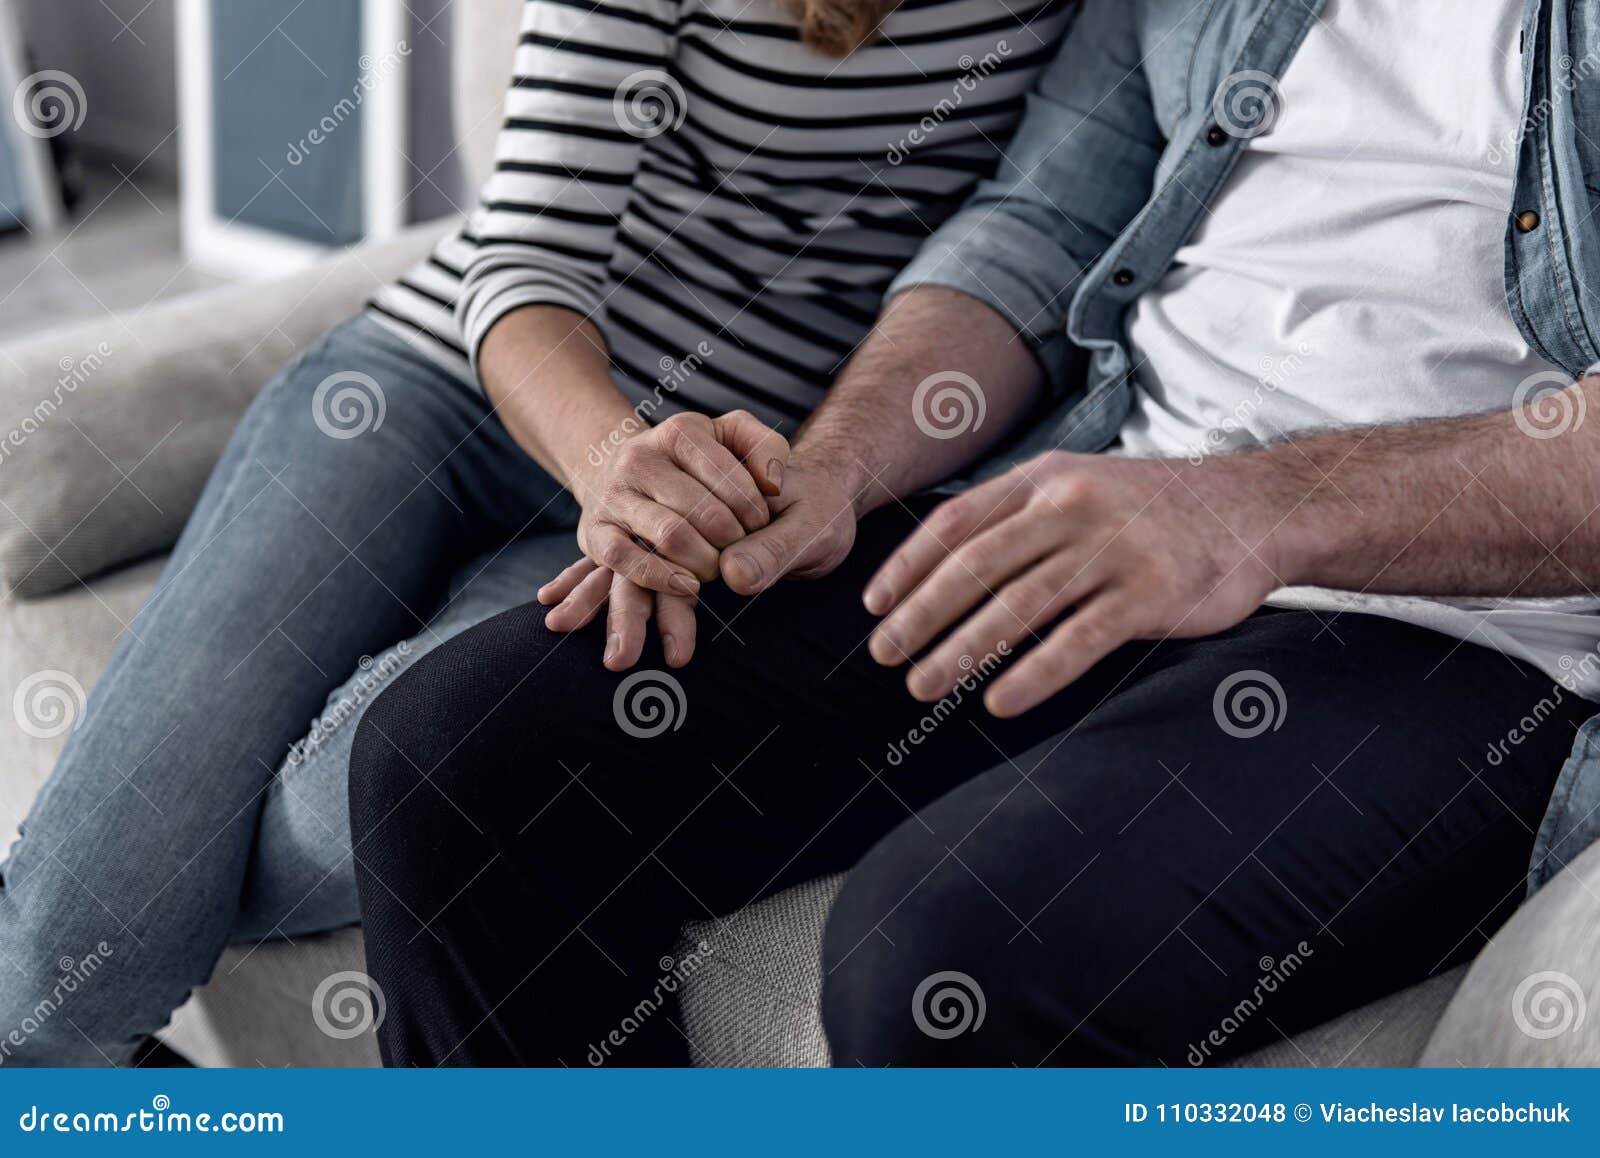 Loving Wife Holding A Hand Of Her Husband While Sitting With Him Royalty Free Stock Image 